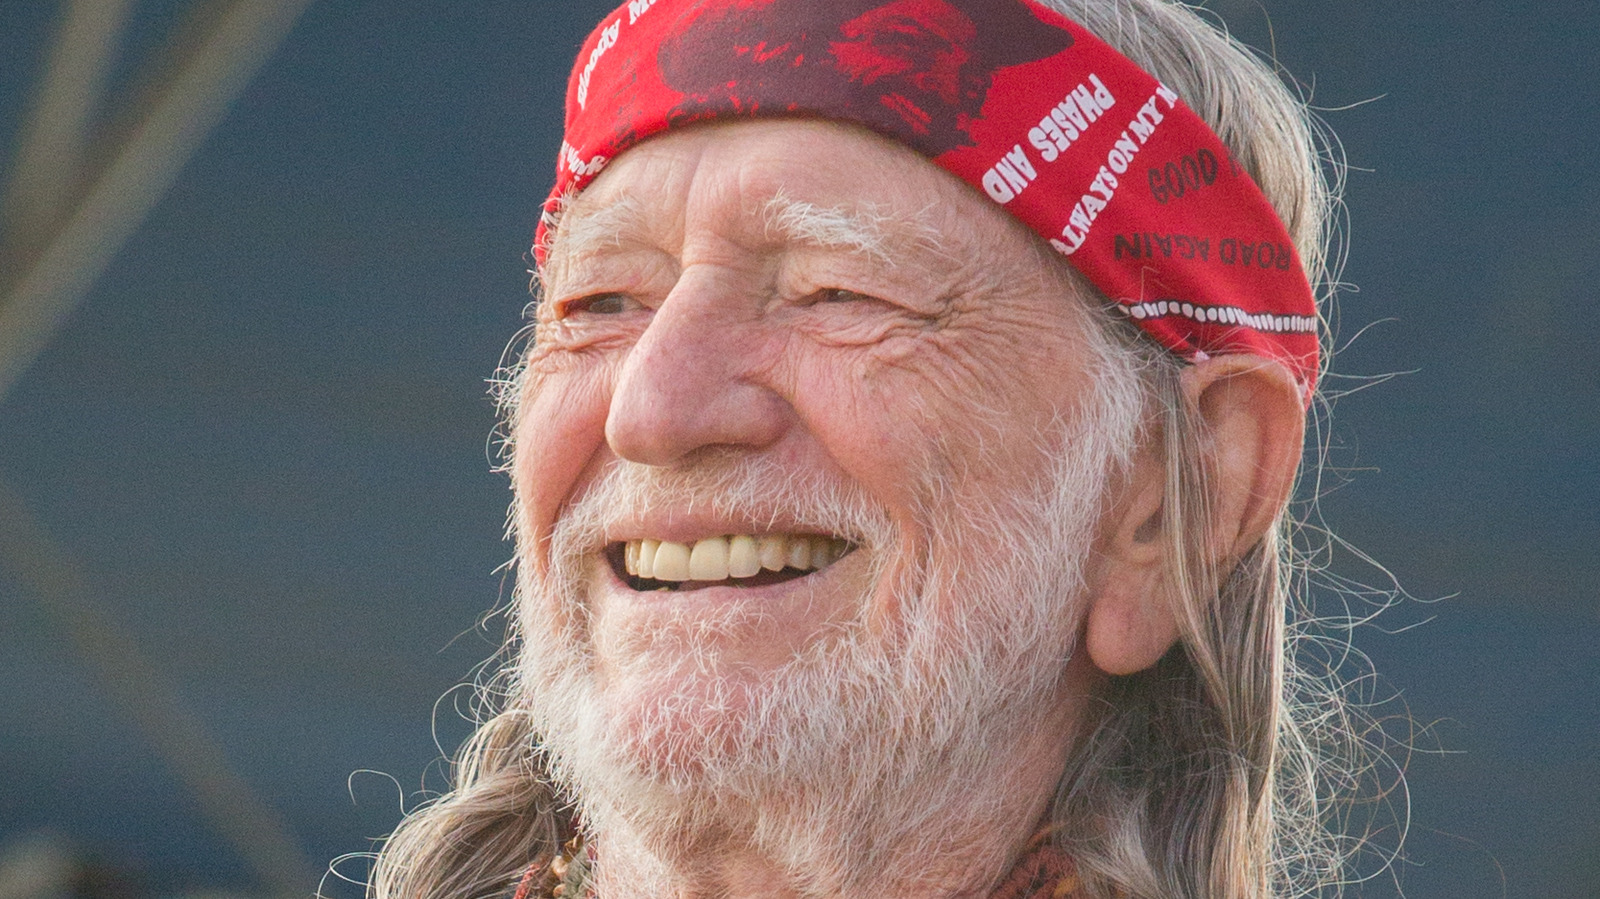 Willie Nelson's Net Worth The Legendary Musician Is Worth Less Than